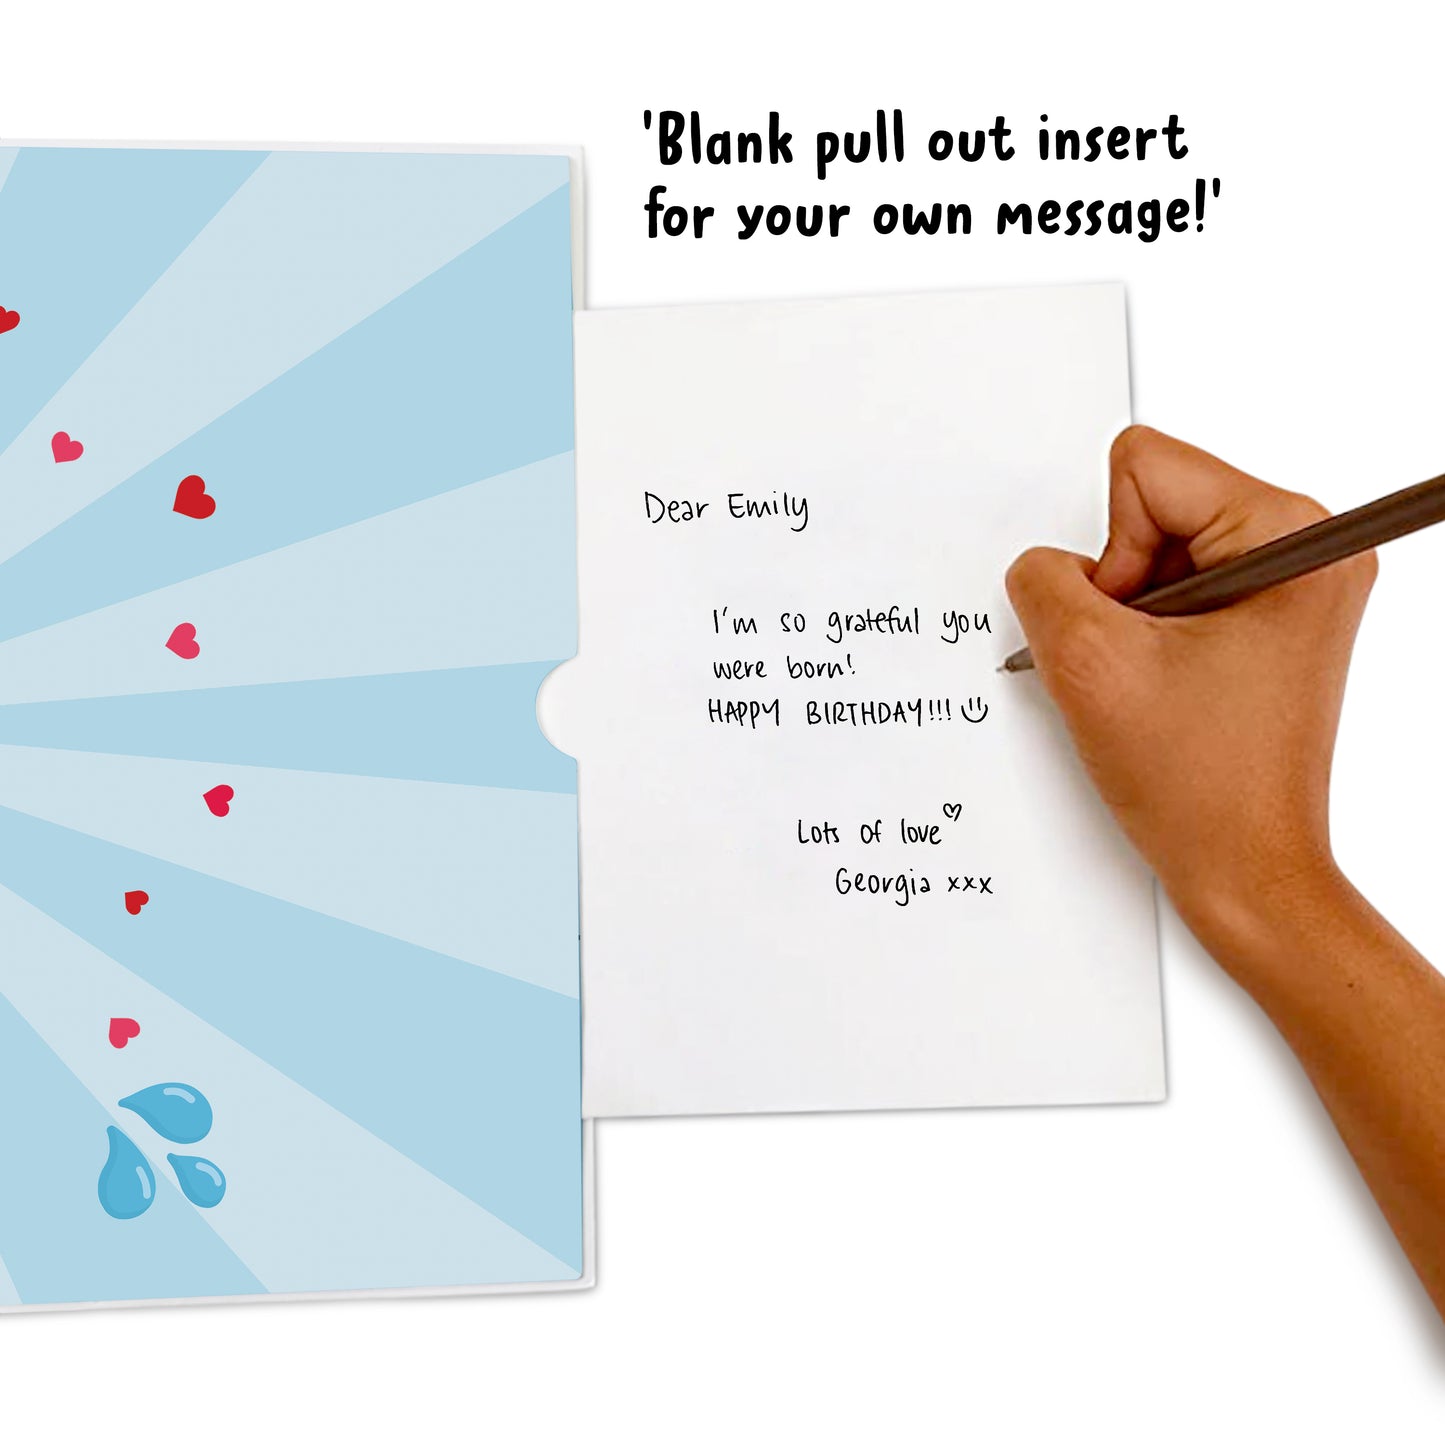 Funny Naughty Pop Up Card - I'll Give You The D - Aubergine - Eggplant - Peach - Dirty Pop Up Card - For Men Women Boys Girls Him HerPop Up Card - Gamer - For Men Women Boys Girls Him Her